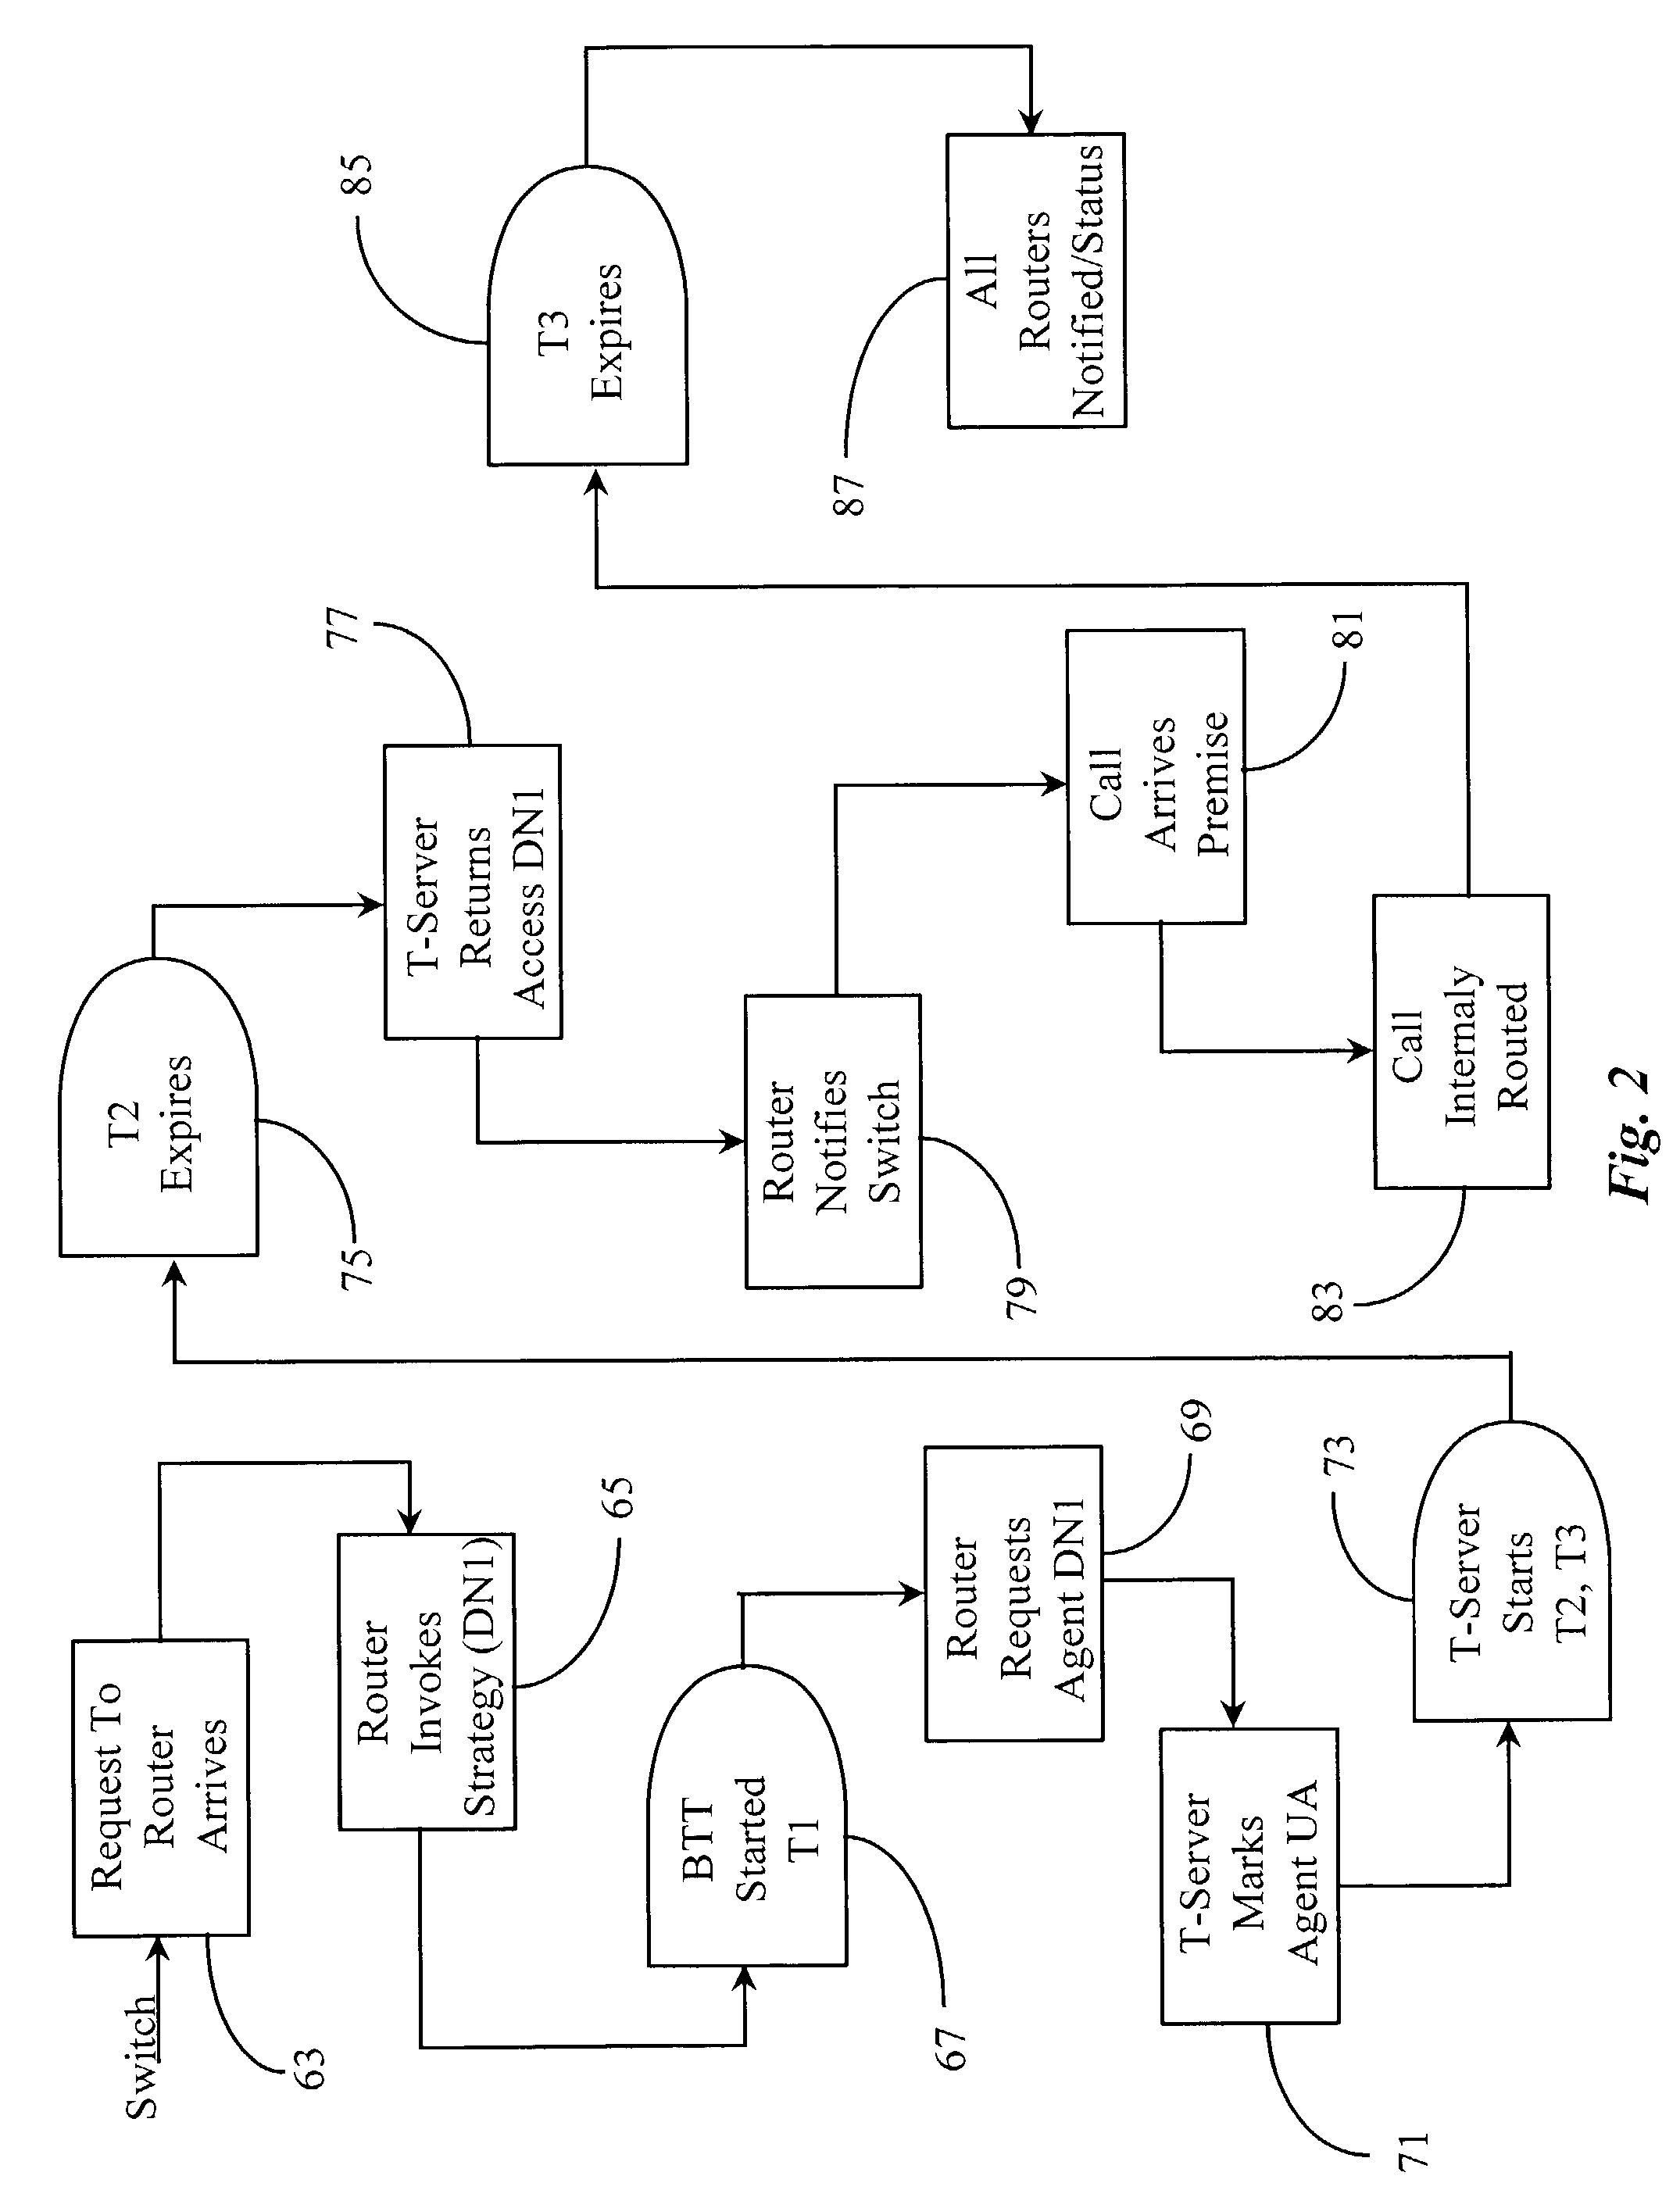 Method and apparatus for providing fair access to agents in a communication center